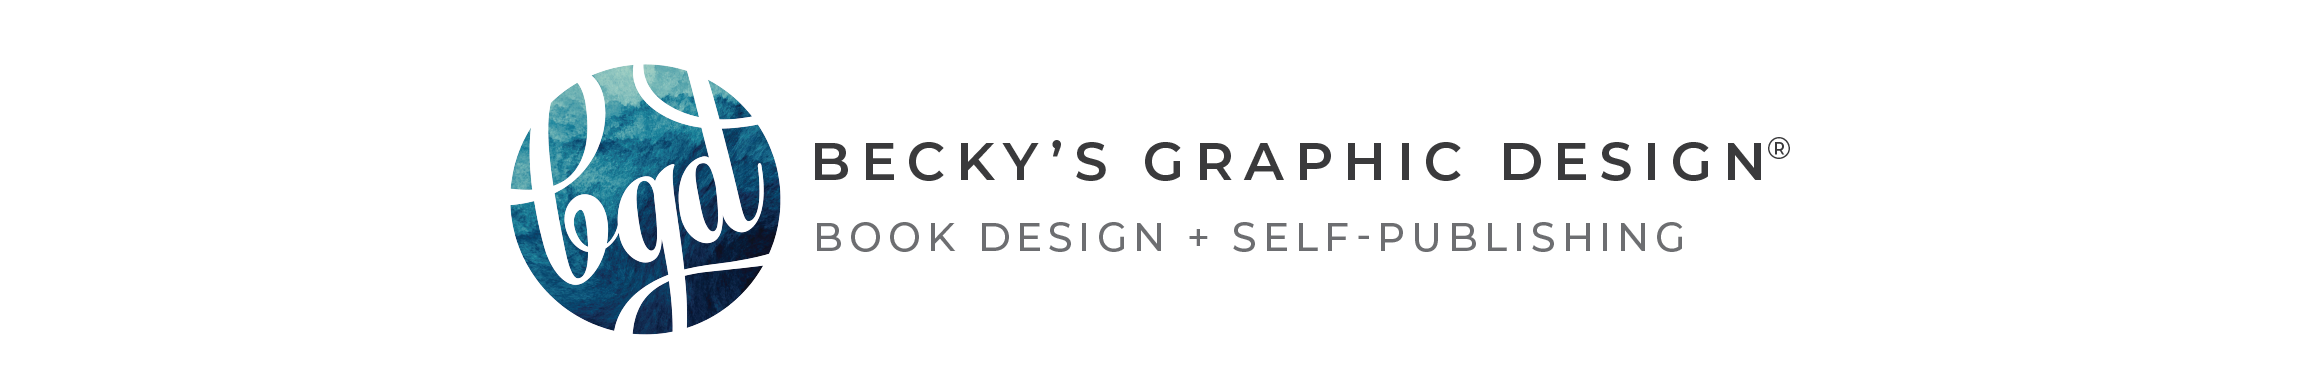 Becky's Graphic Design®